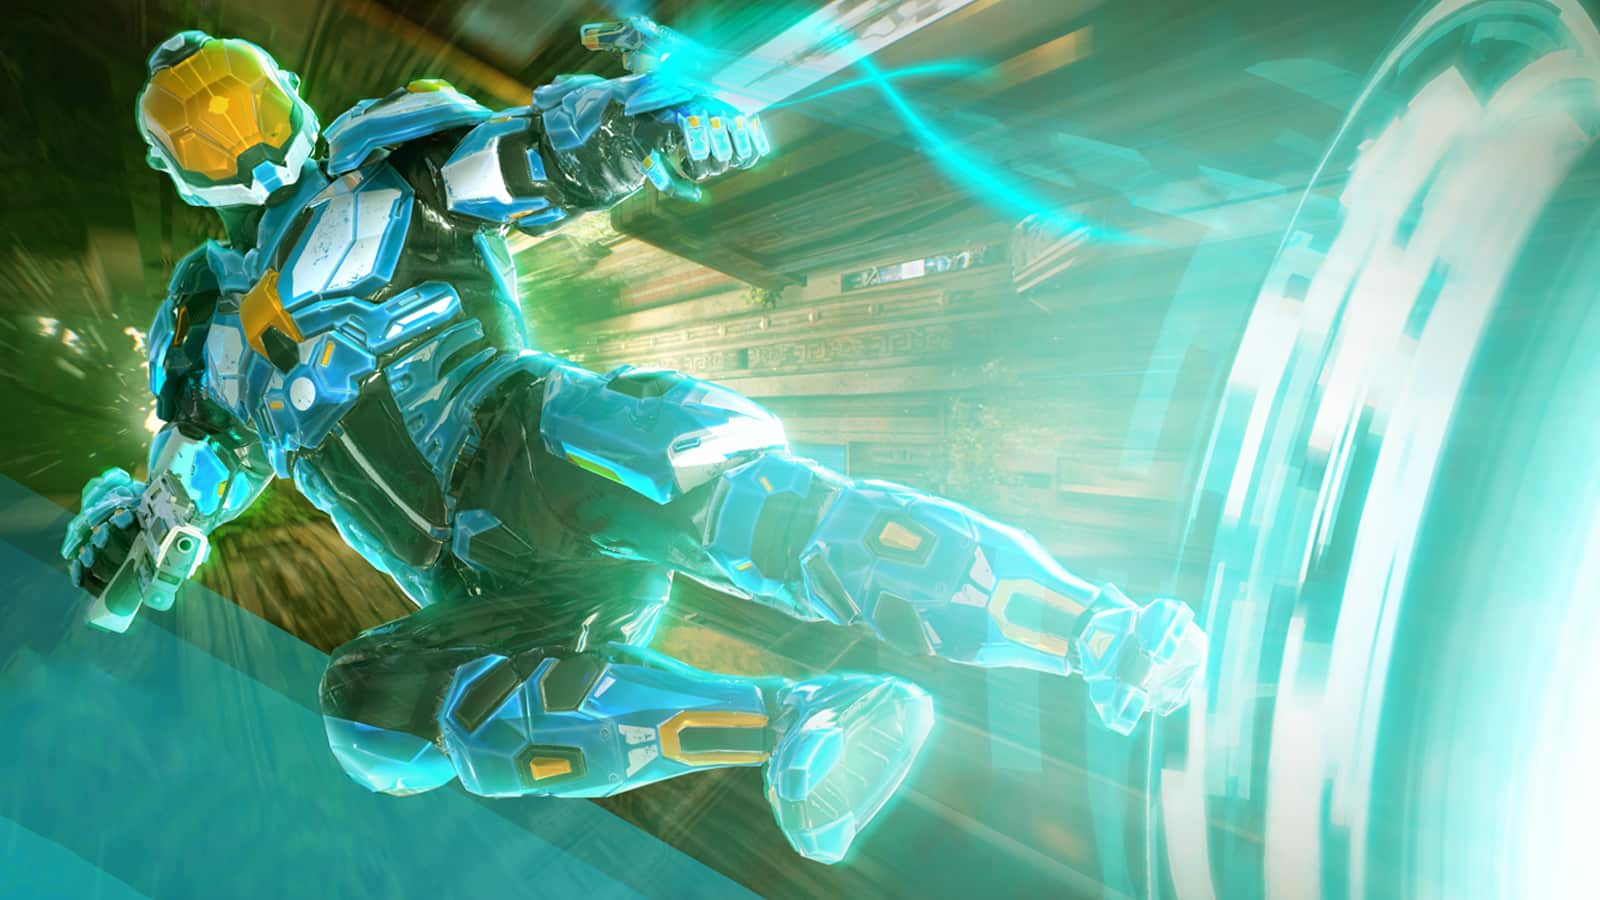 Splitgate takes the old Halo formula and adds an awesome Portal spice to the mix.